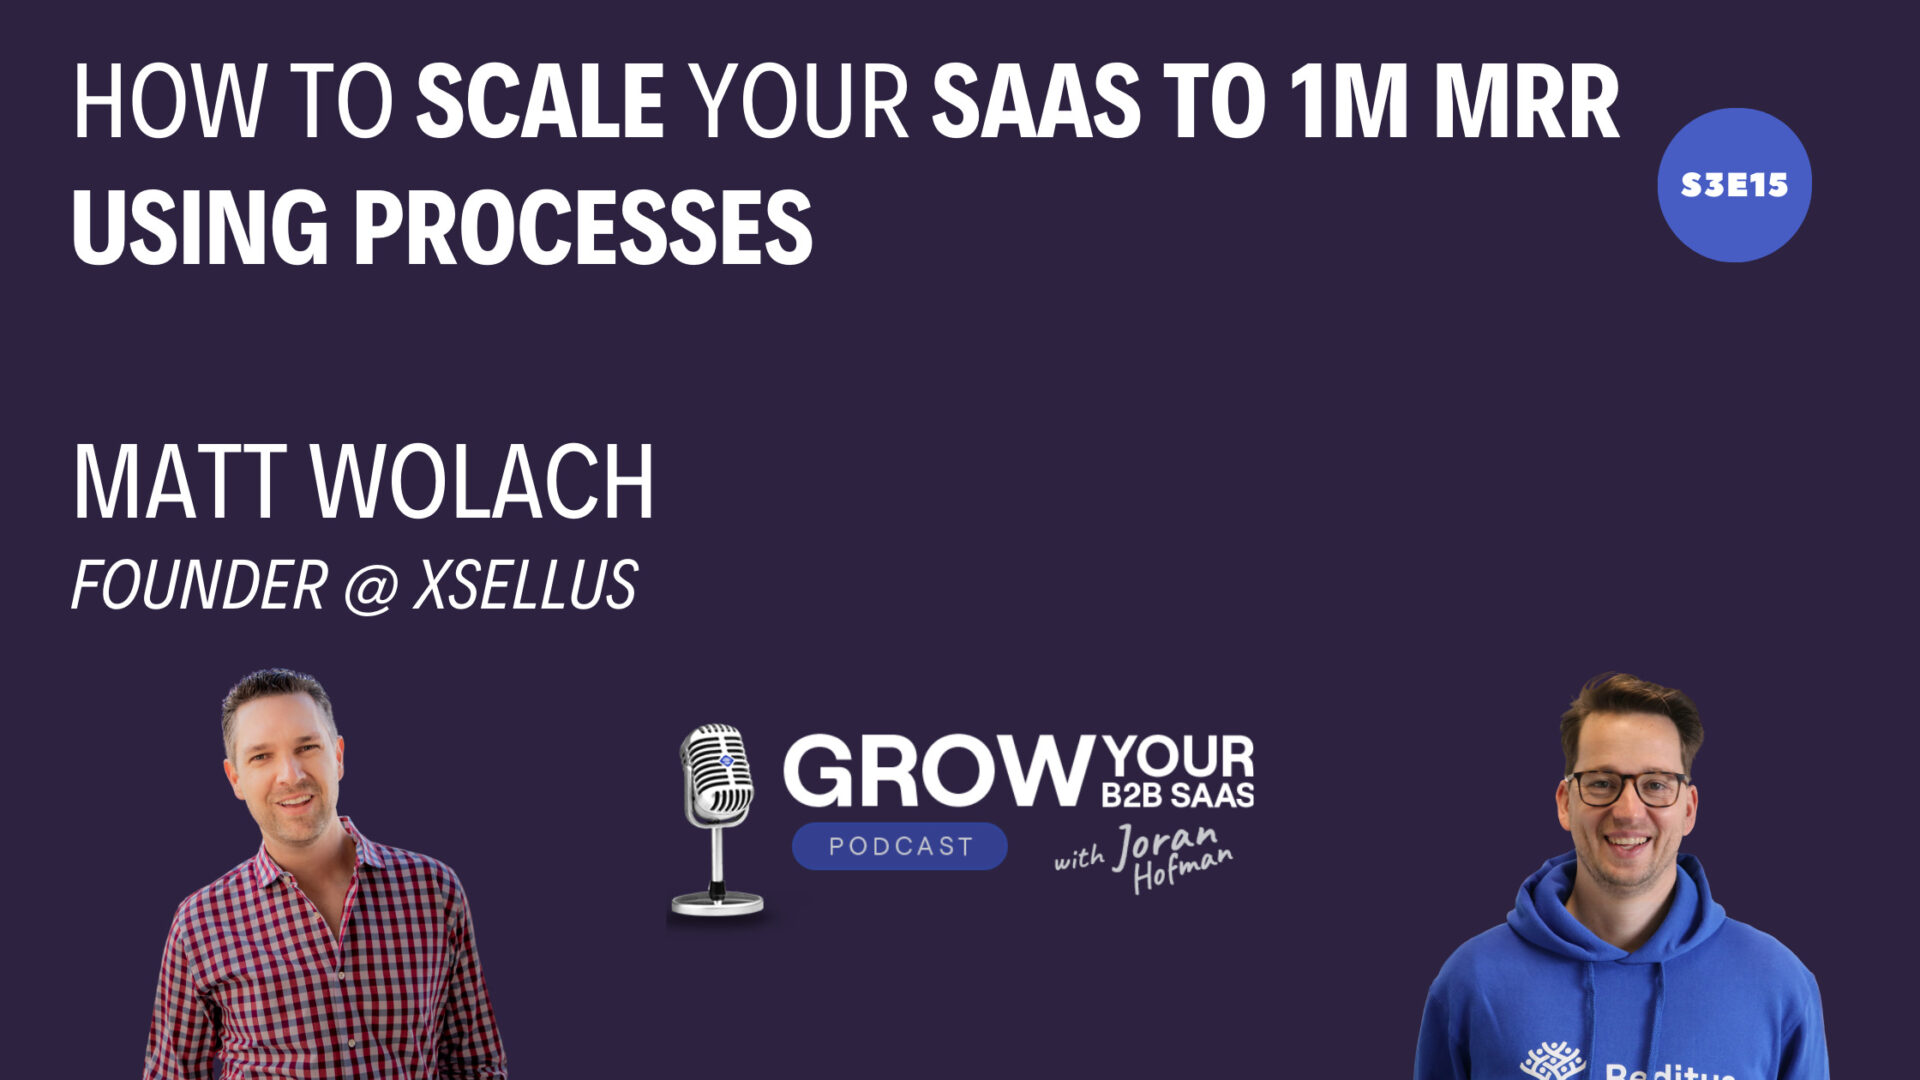 https://www.getreditus.com/podcast/s3e15-how-to-scale-your-saas-to-1m-mrr-using-processes-with-matt-wolach/